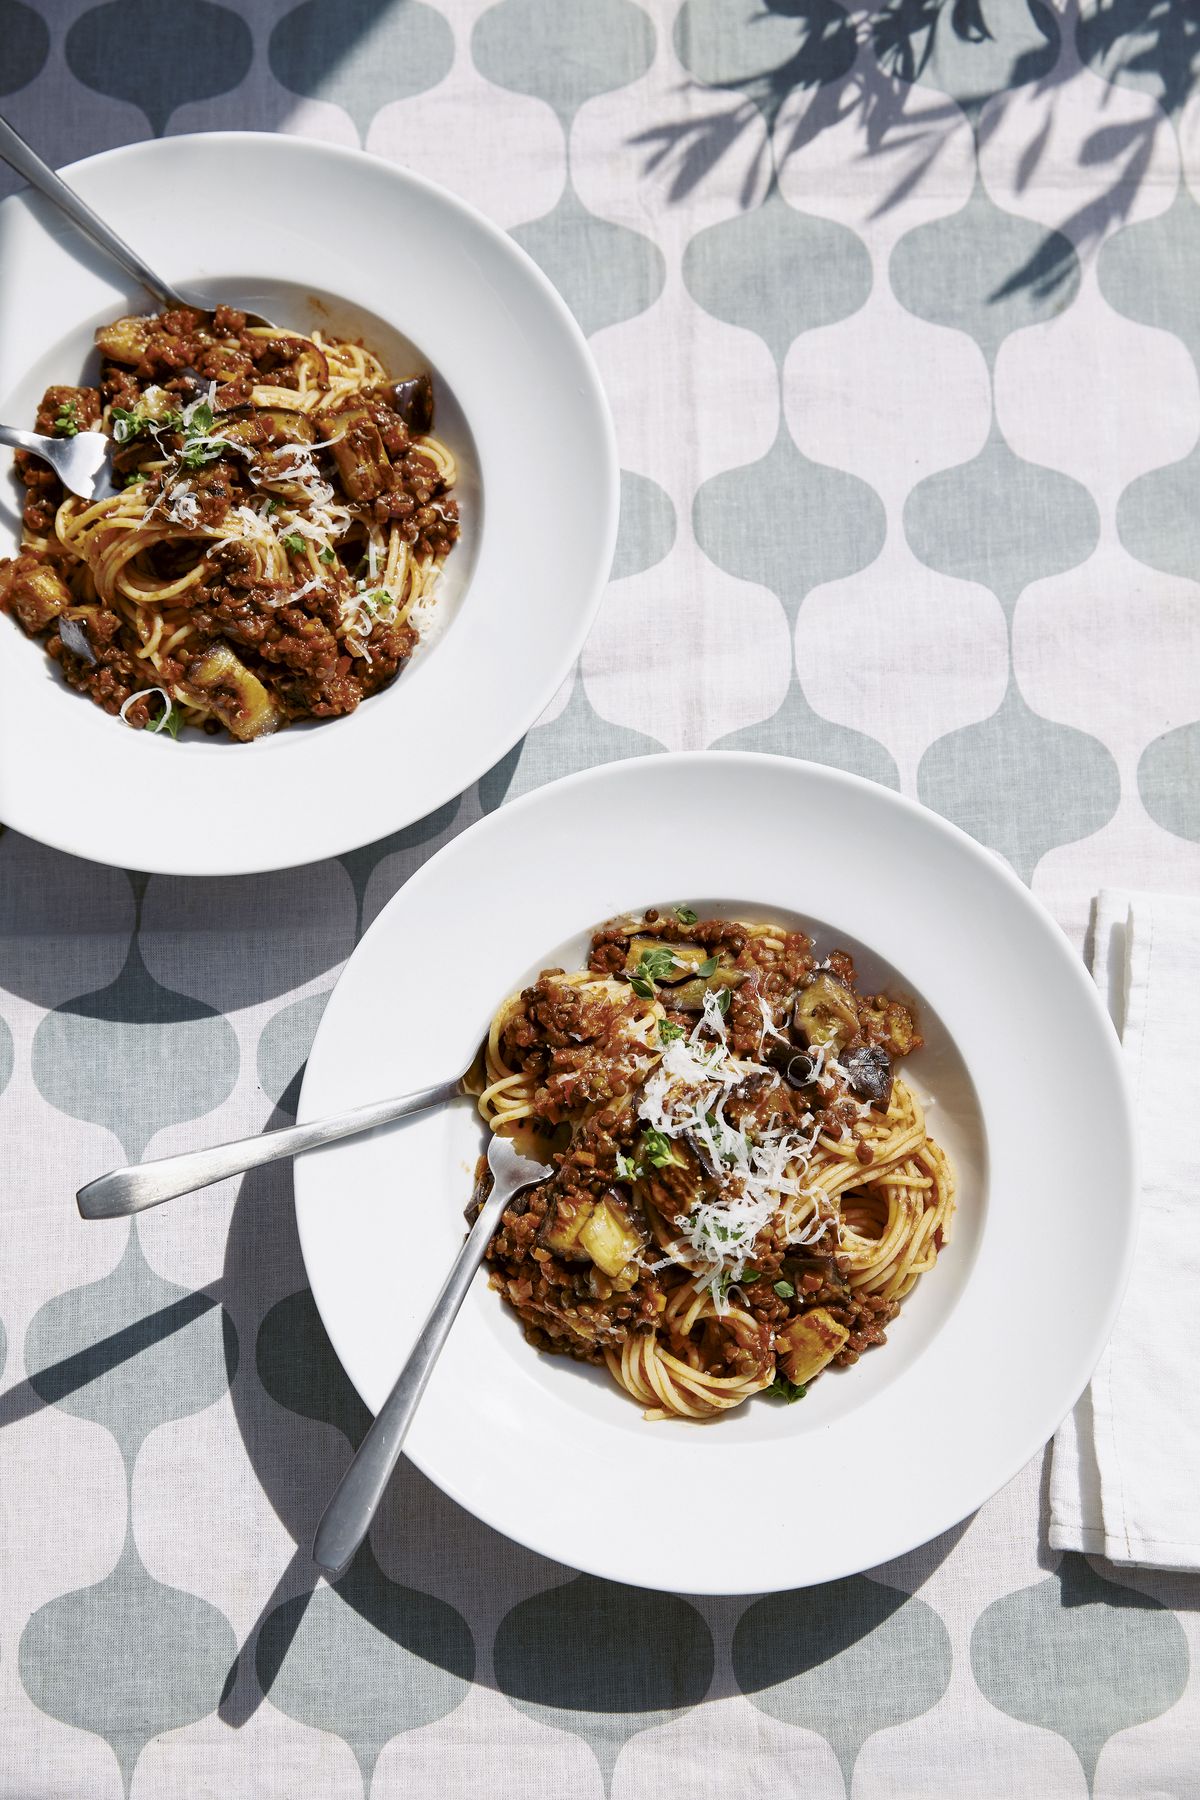 Jessie and Lennie Ware’s Aubergine and Puy Lentil Bolognese